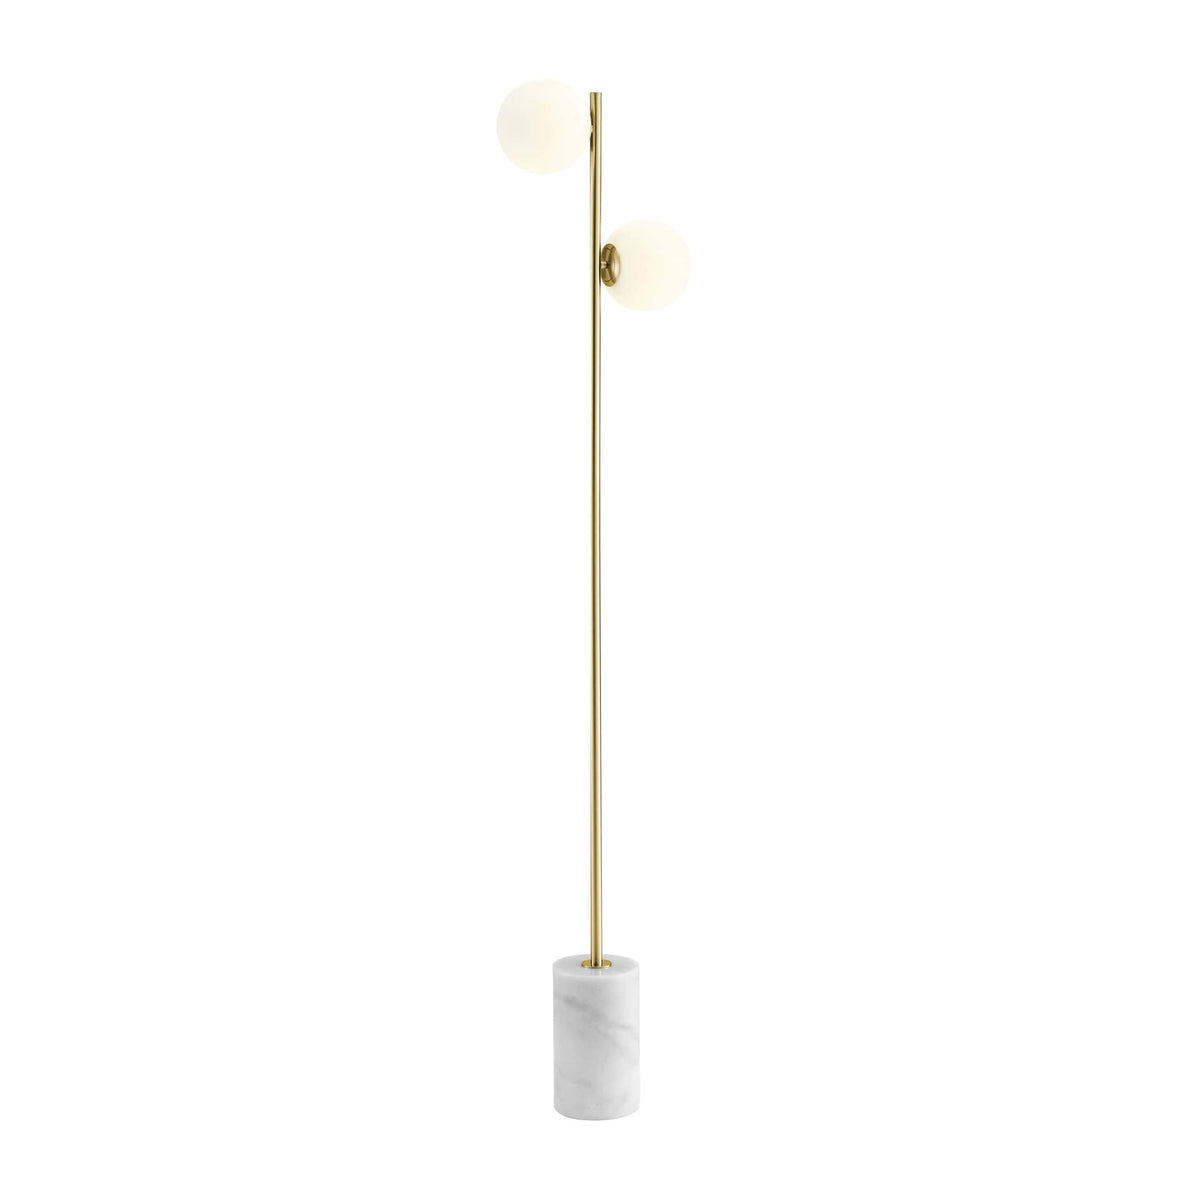 Anechdoche Floor Lamp in Gold and White / 2 Lights